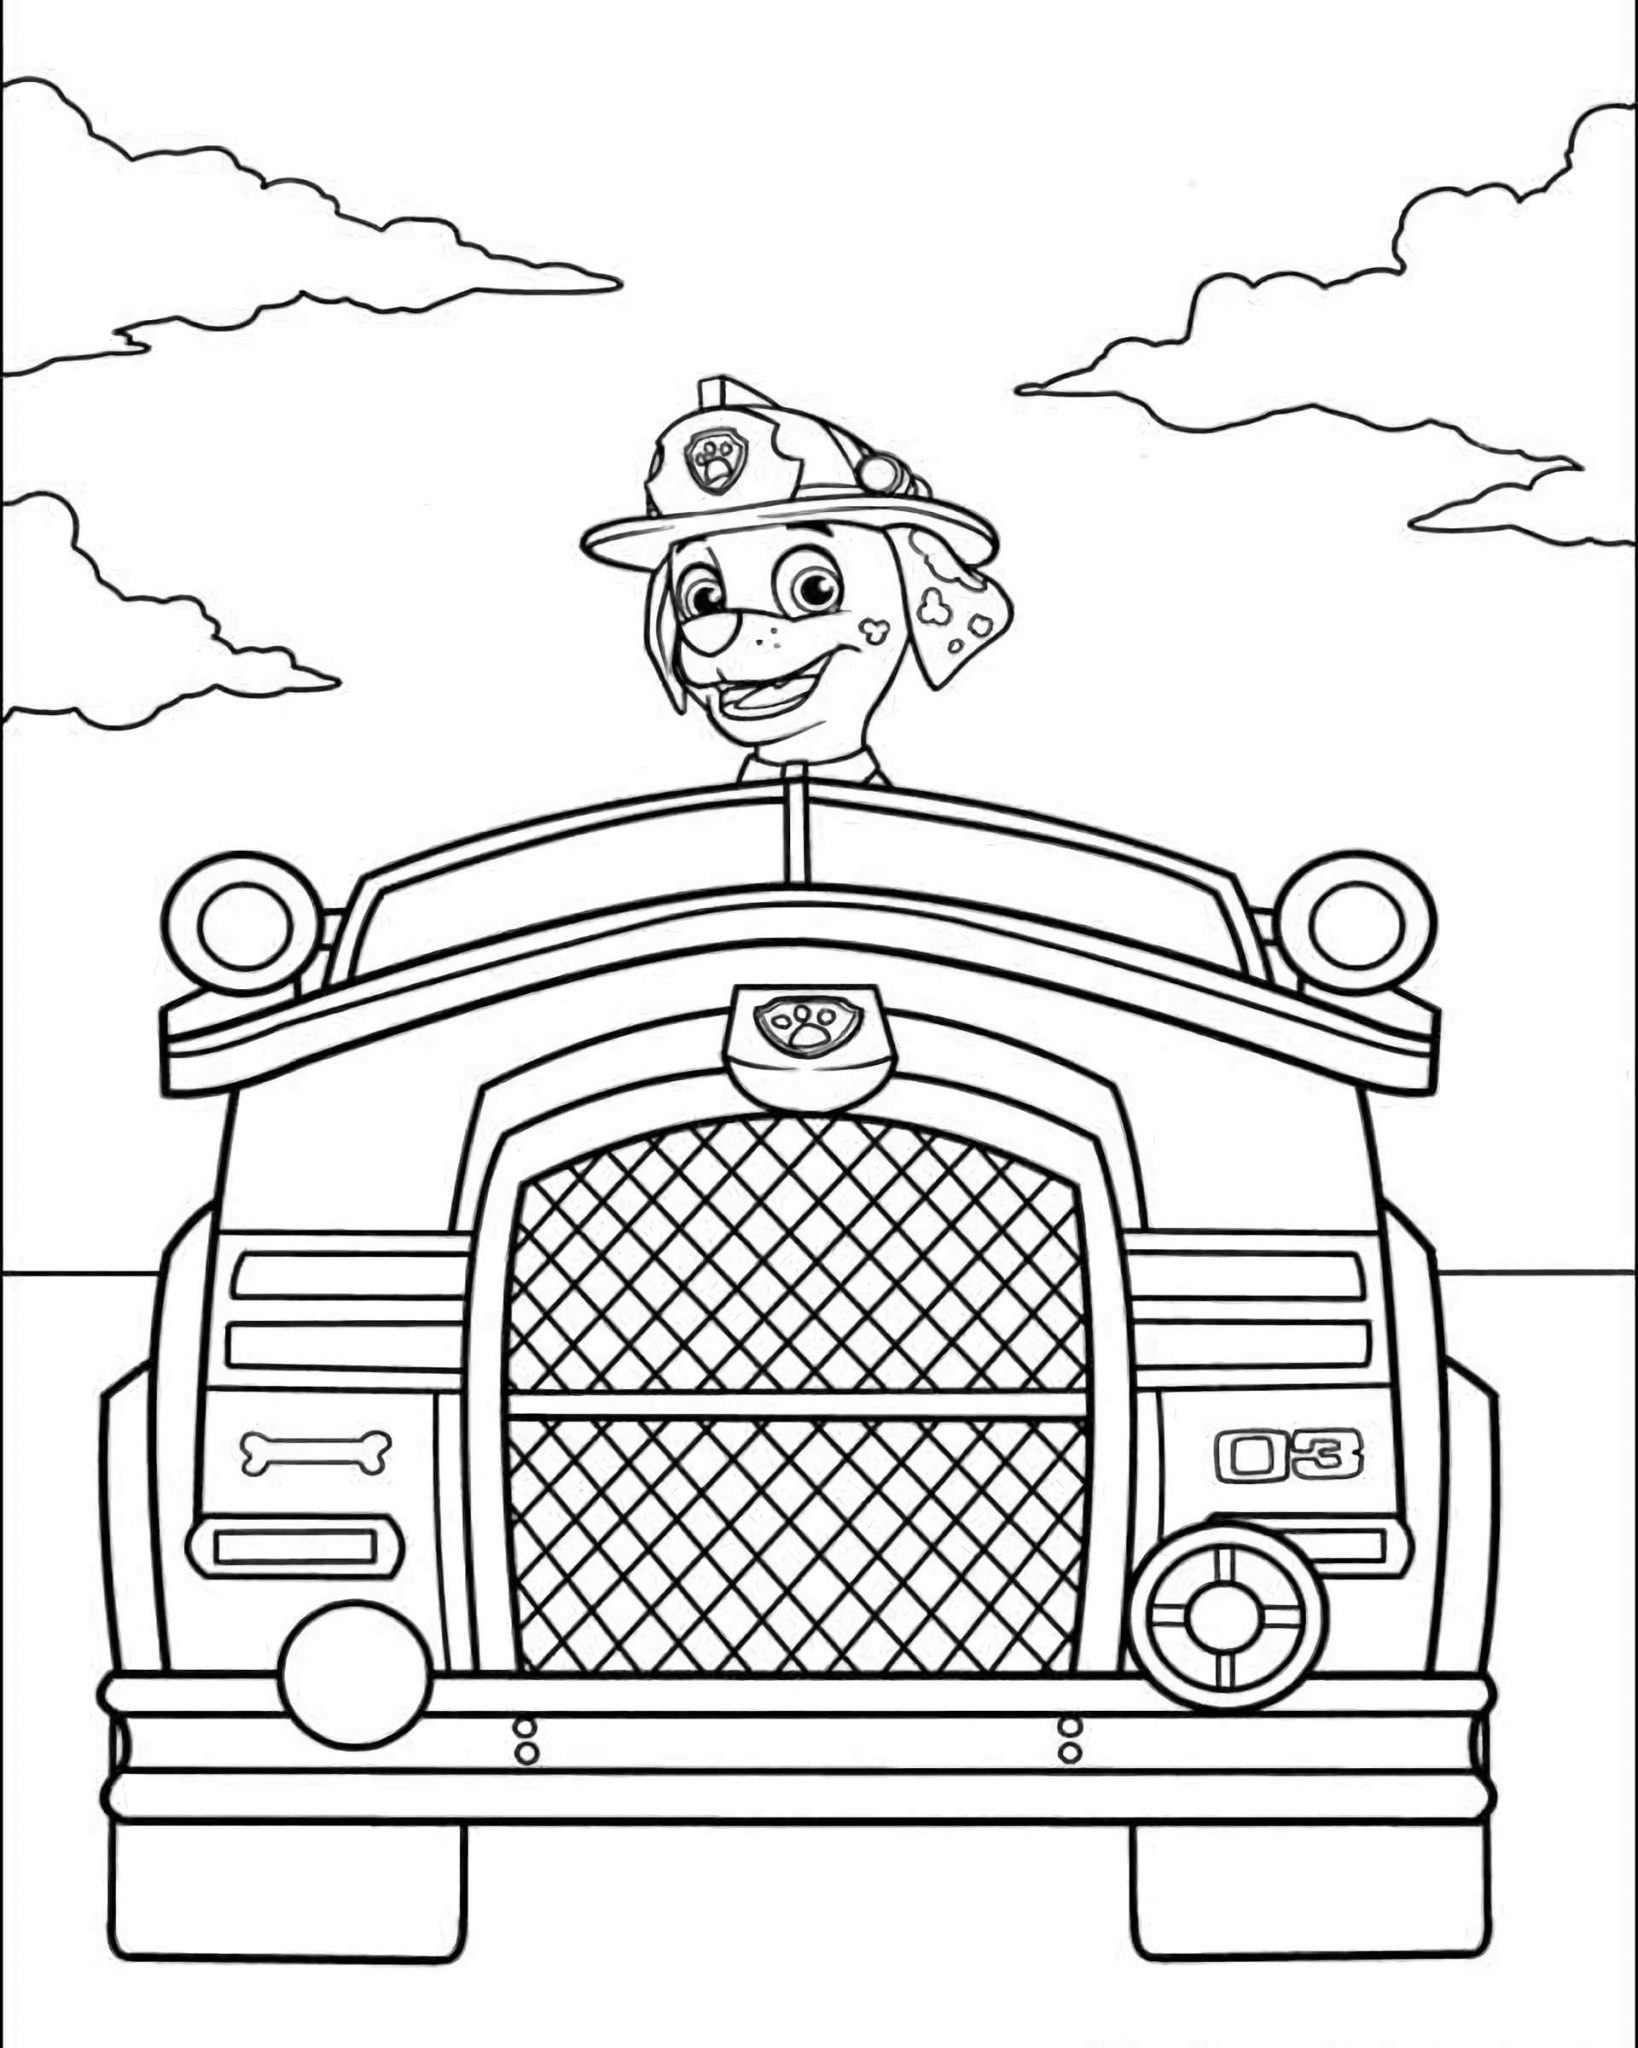 coloring pages paw patrol police car